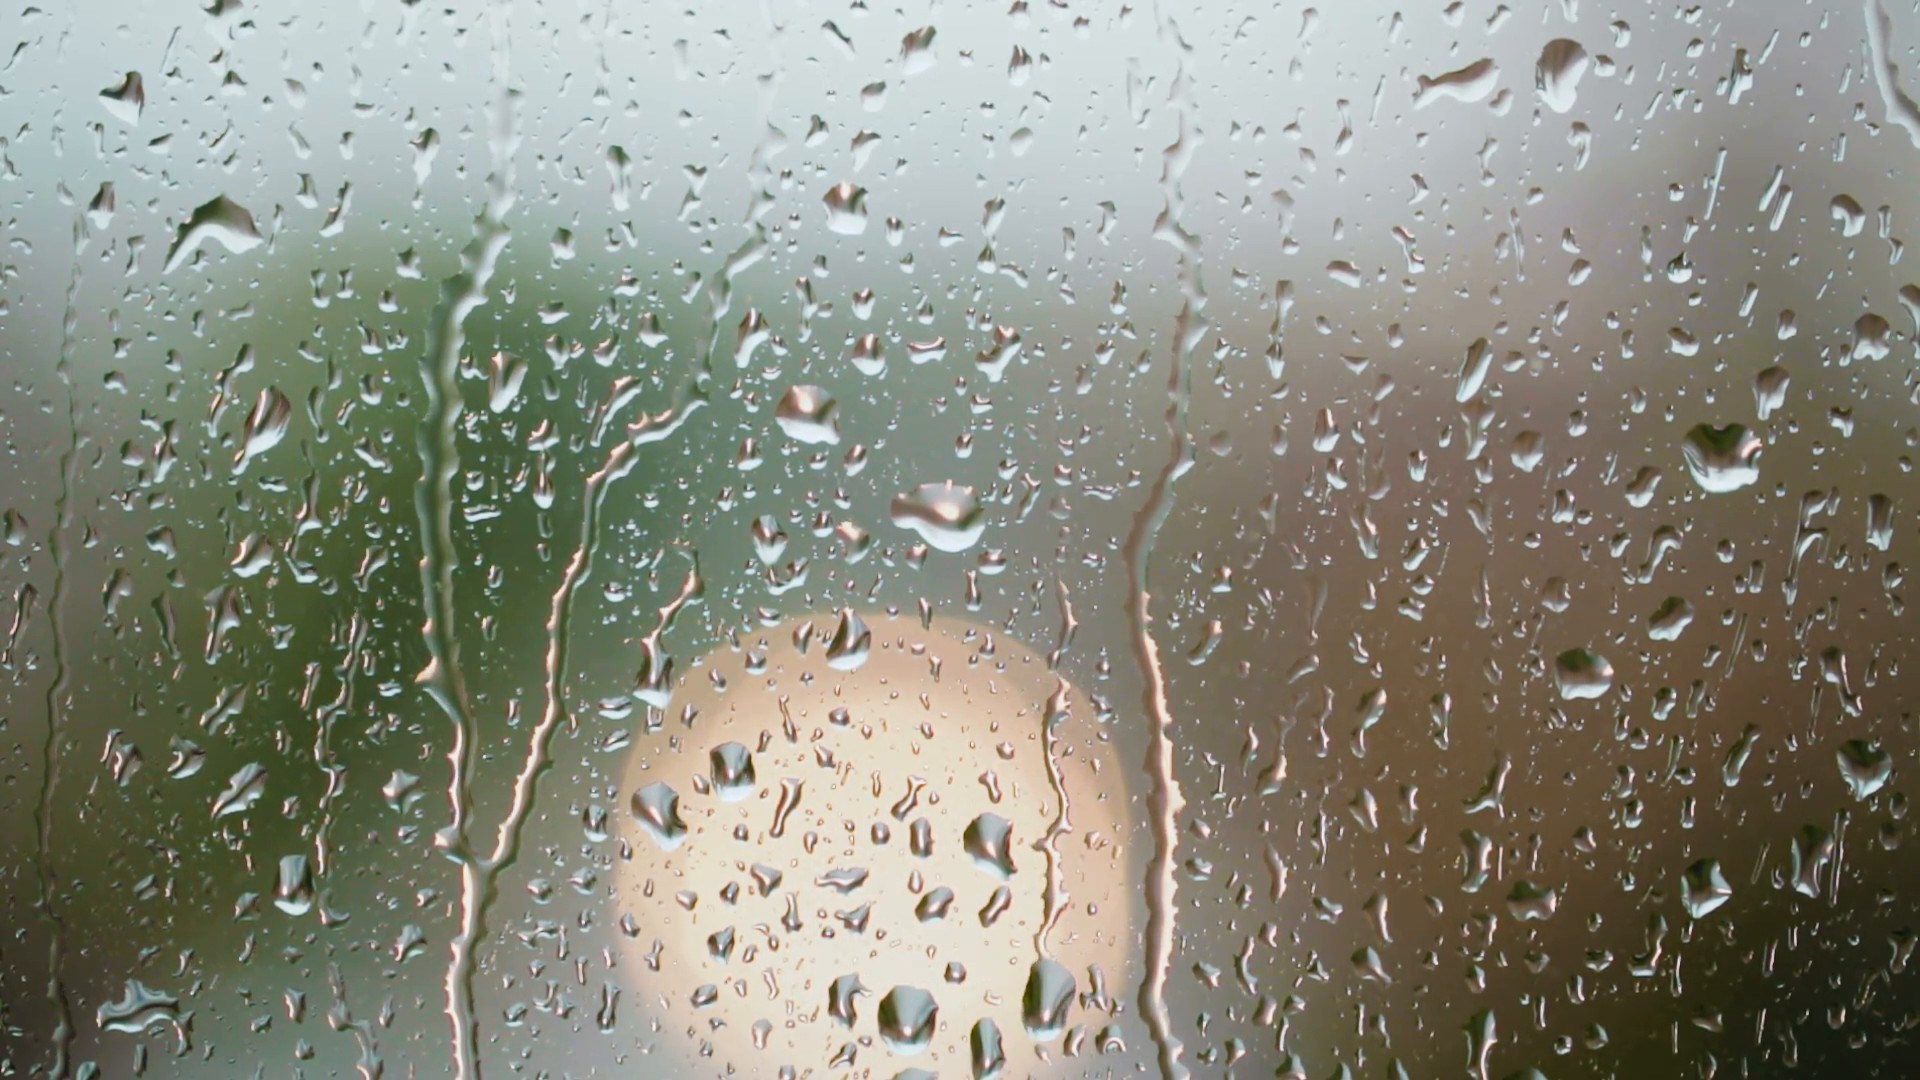 1920x1080 Rain drops on a window with an out of focus vehicle moving in the background.  Stock Video Footage - VideoBlocks